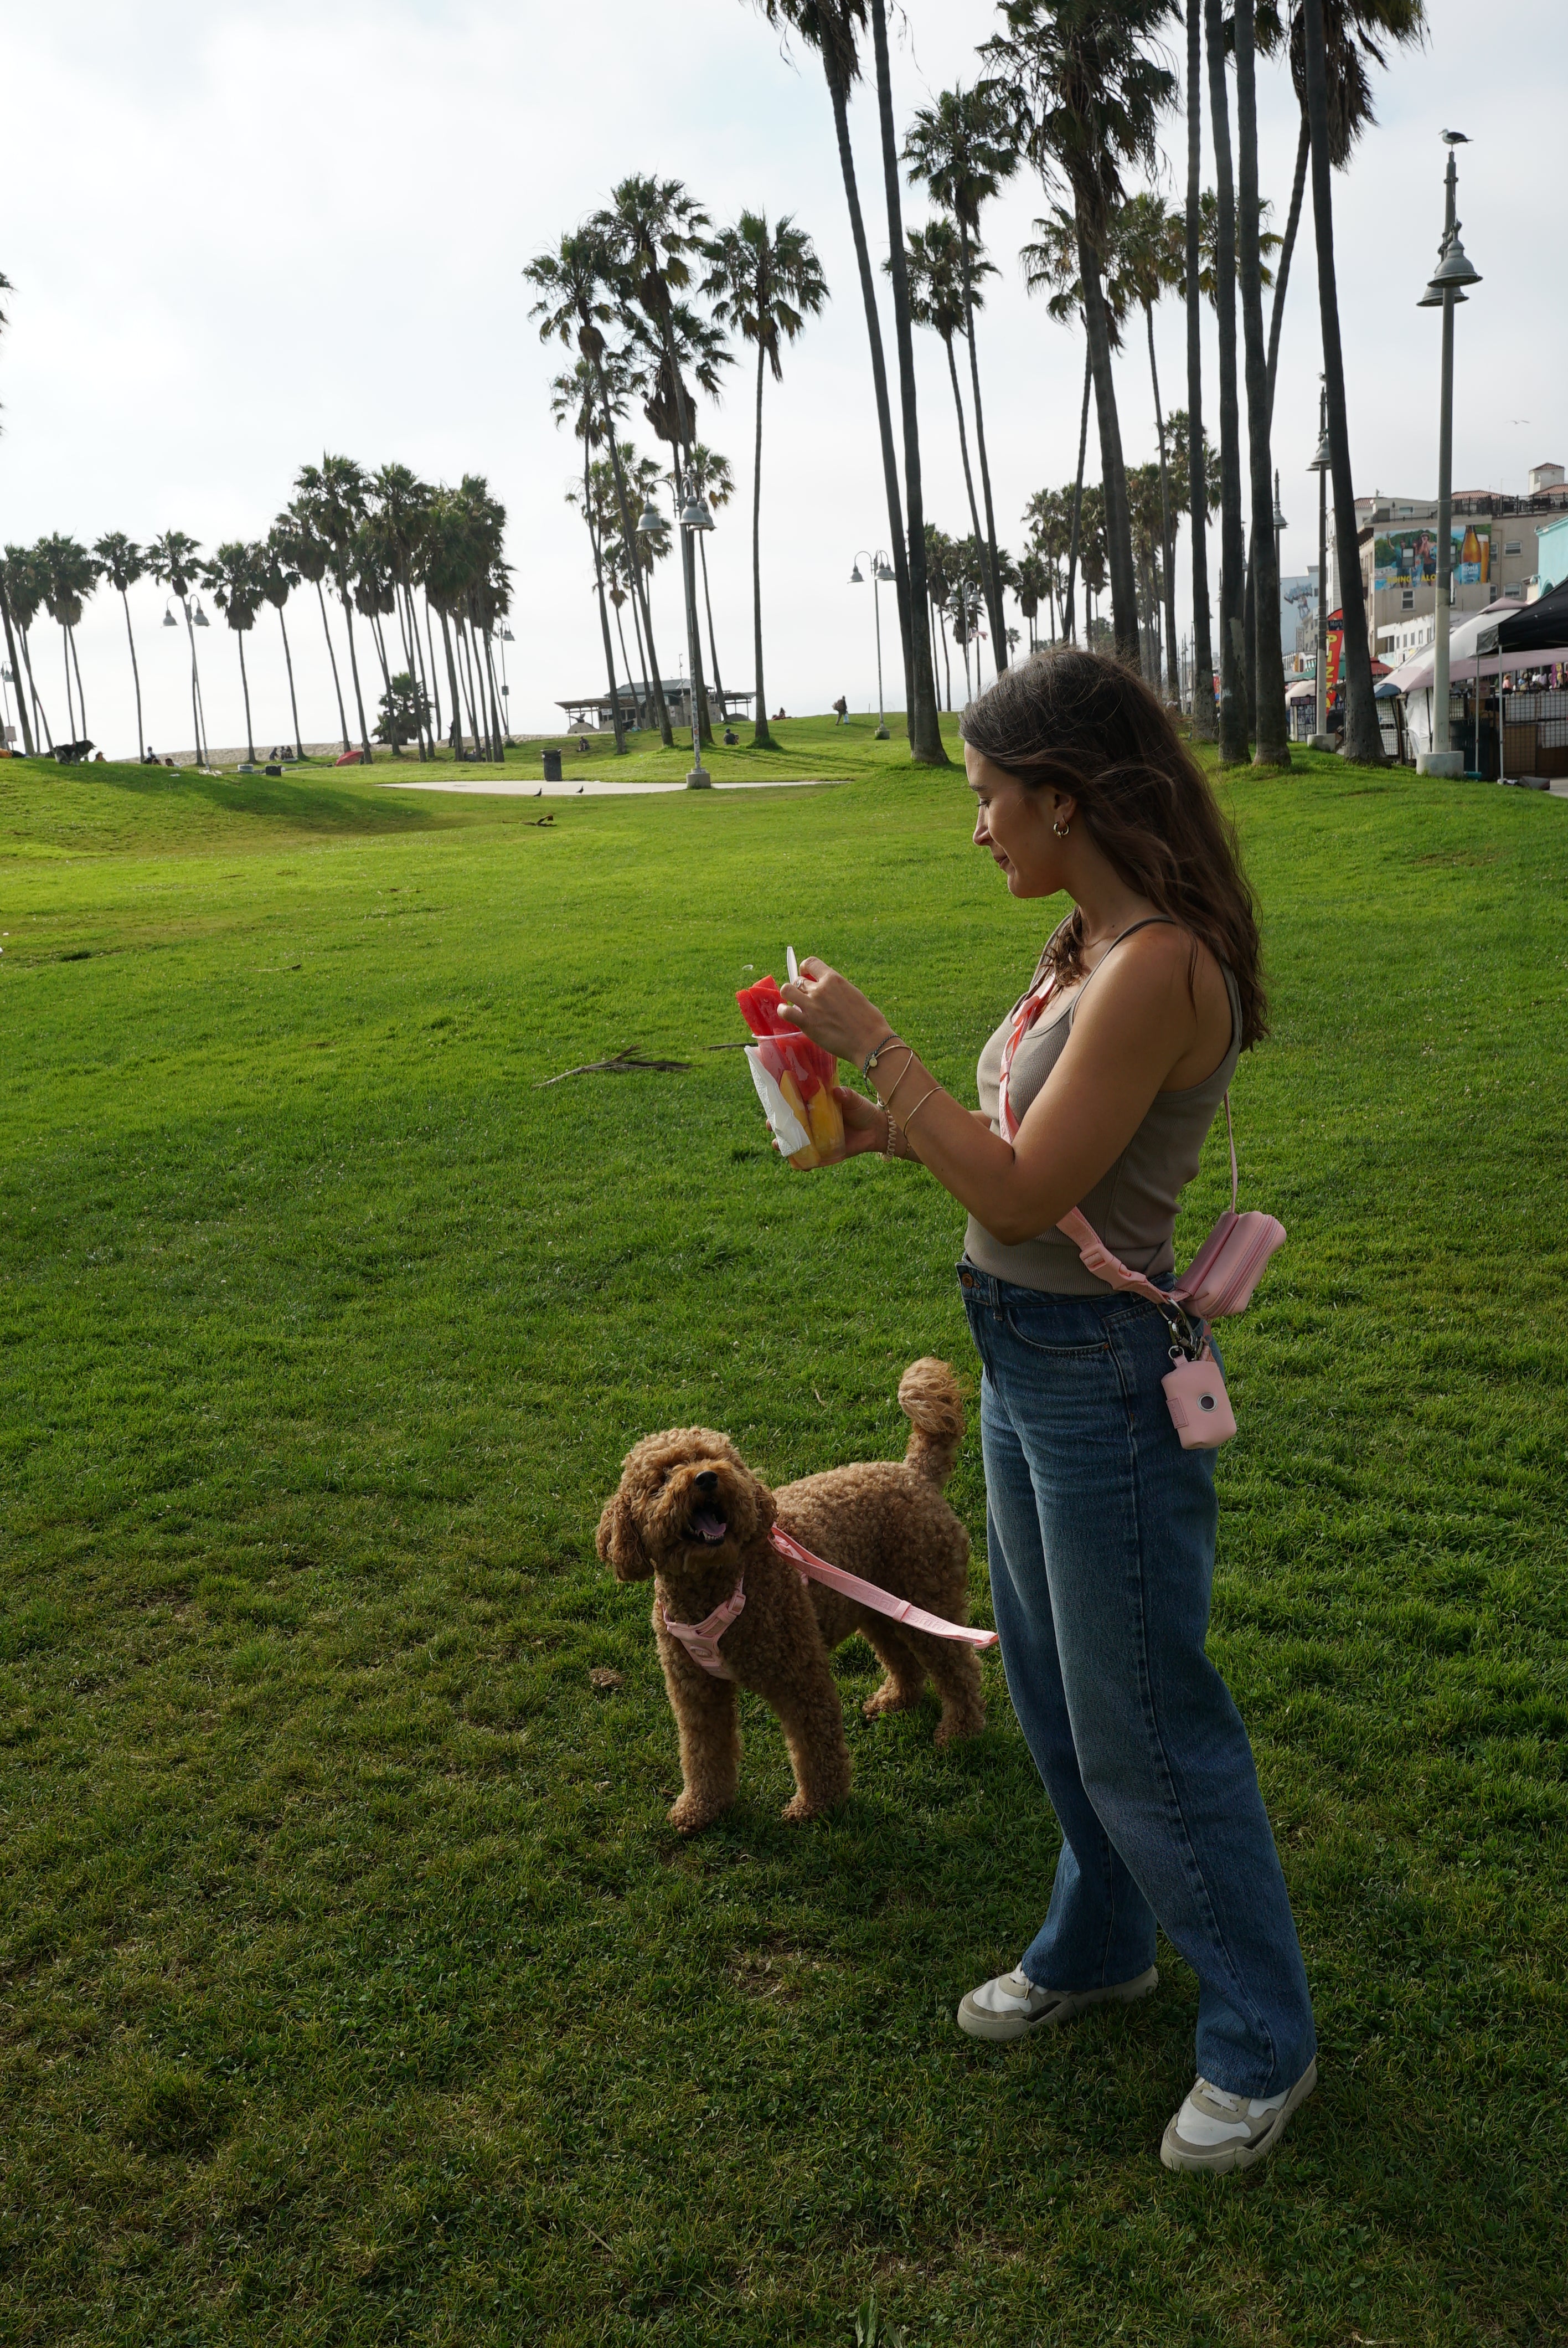  a woman standing in a grassy park, holding a cup of watermelon slices. She is wearing blue jeans, a gray tank top, and a Blush Pink crossbody bag from Lulu's brand. Her fluffy, curly-coated dog, wearing a matching Blush Pink harness and leash, stands next to her, looking up happily. The background features tall palm trees and an open green space, creating a serene and relaxed atmosphere